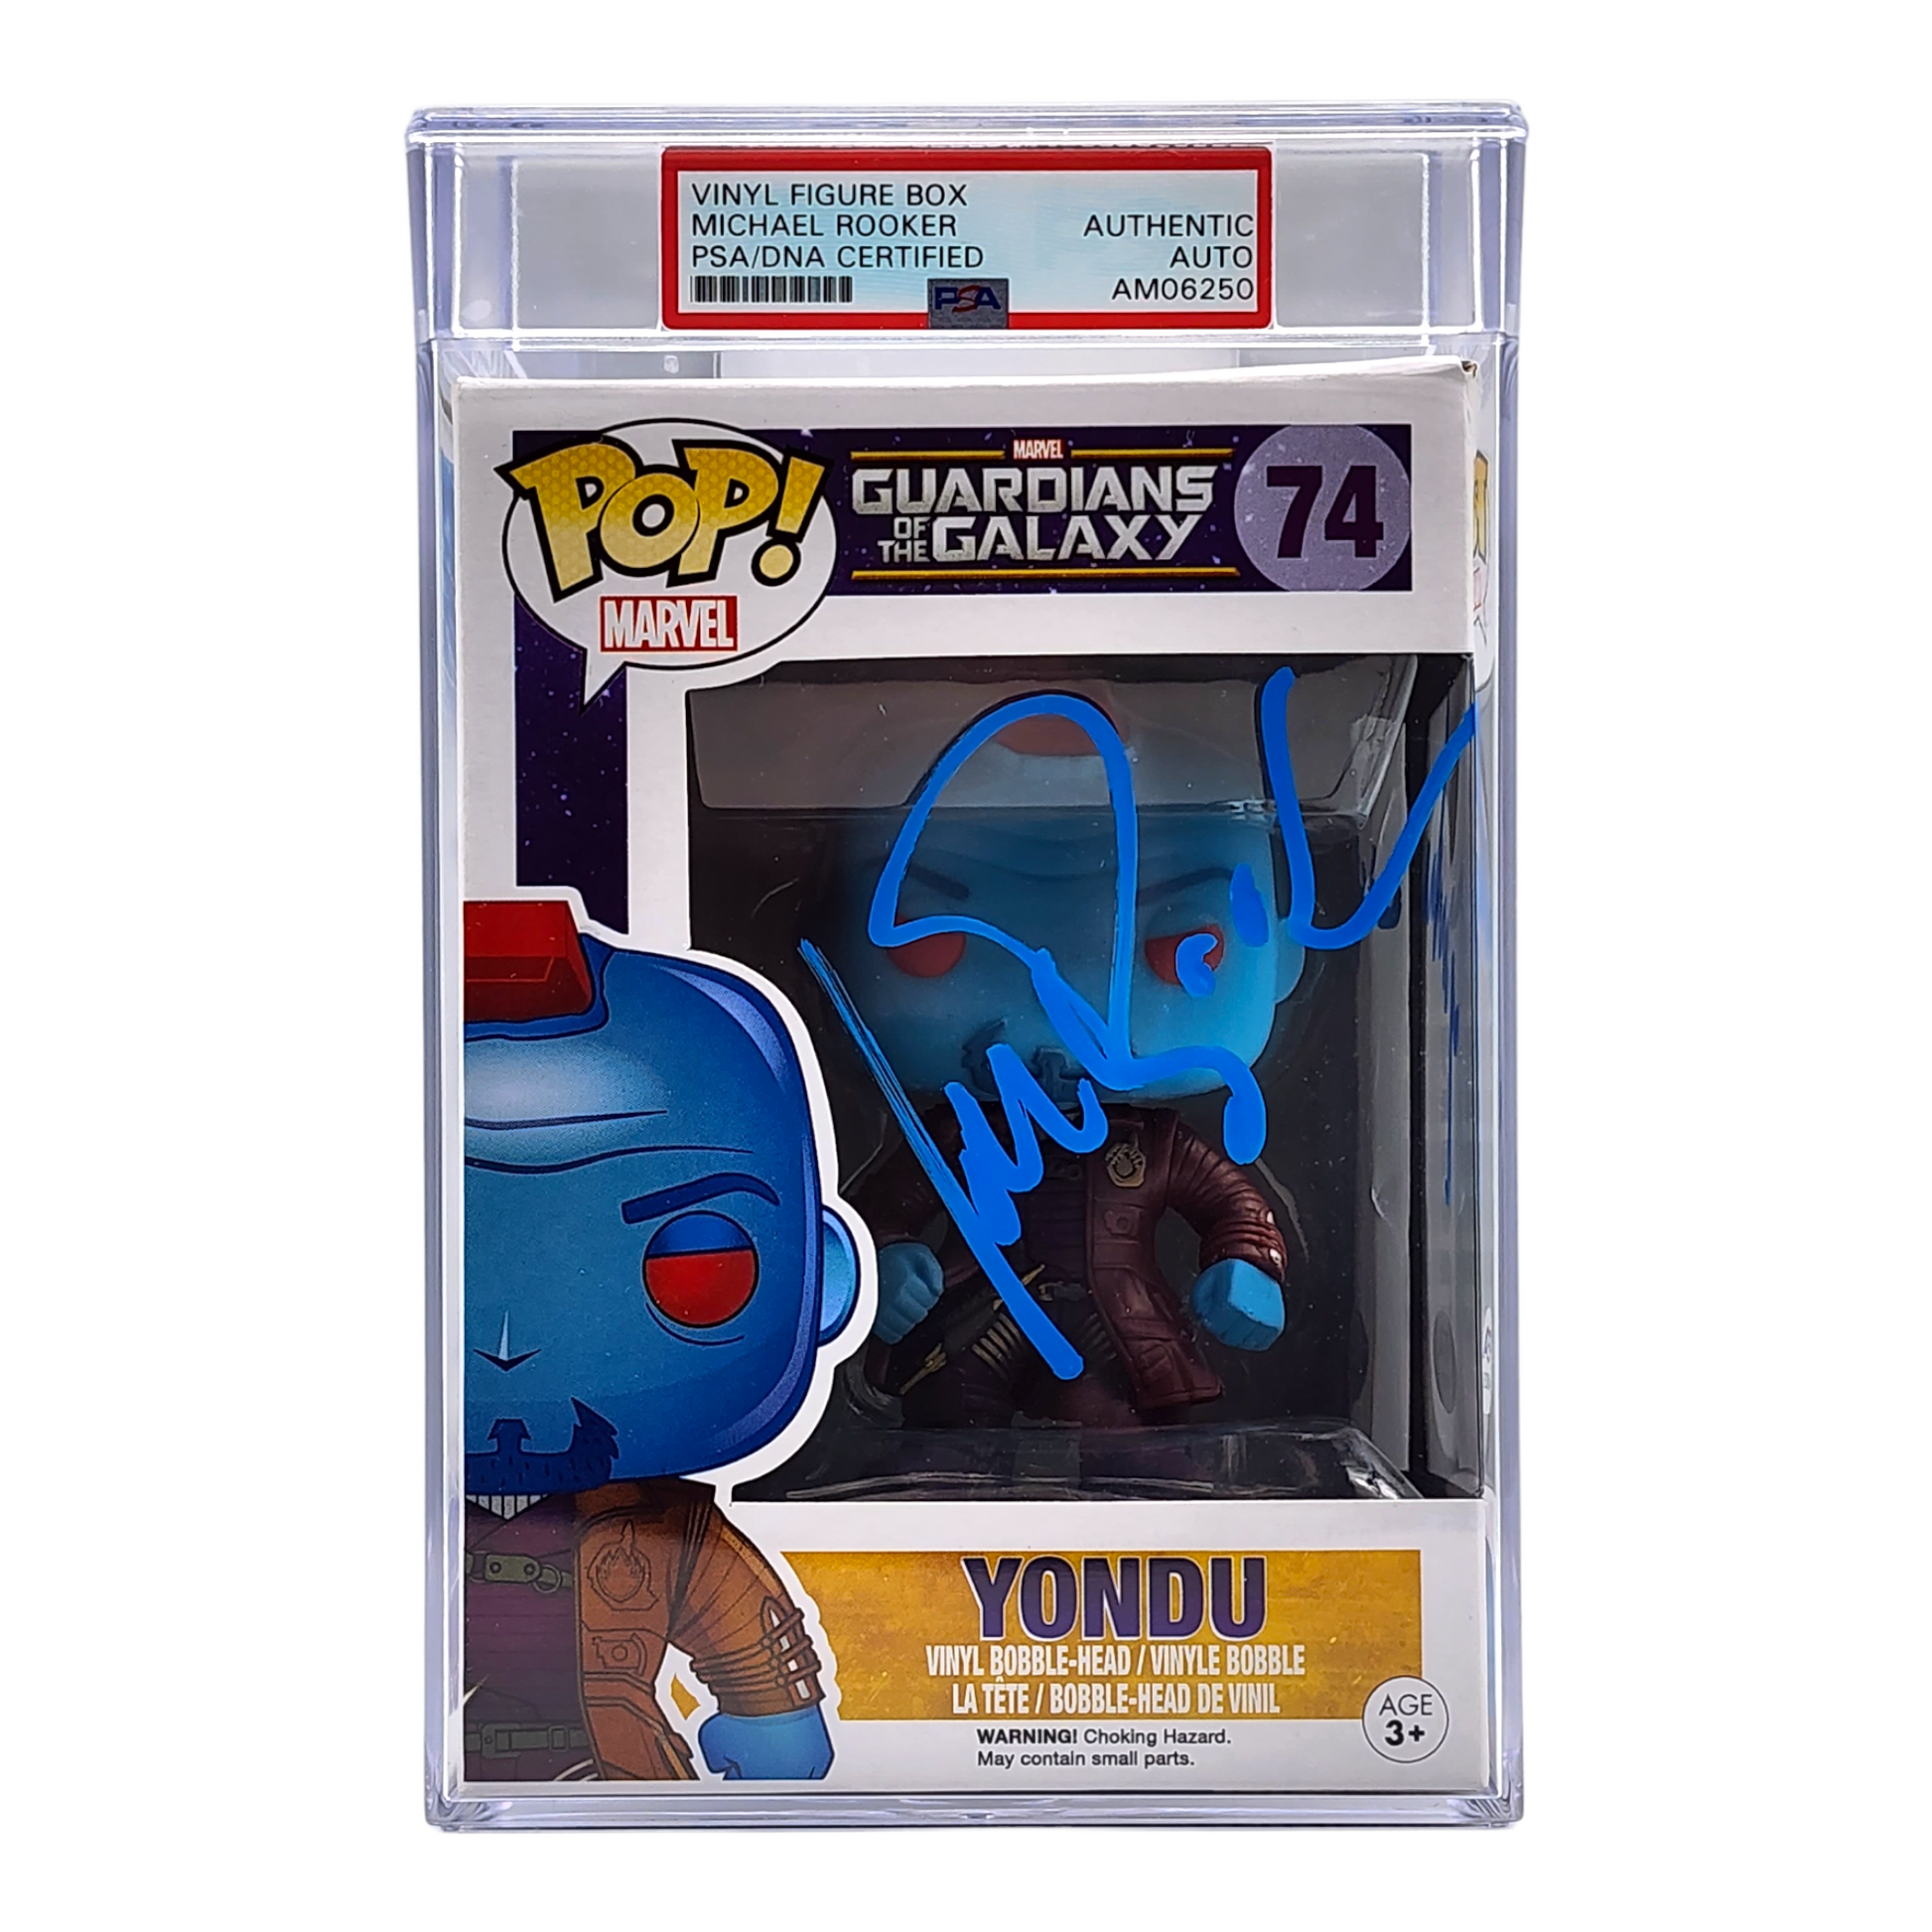 Subjektiv Urter Whirlpool PSA ENCAPSULATED & SIGNATURE CERTIFIED - YONDU - (SIGNED BY MICHAEL RO –  BAM Collectibles